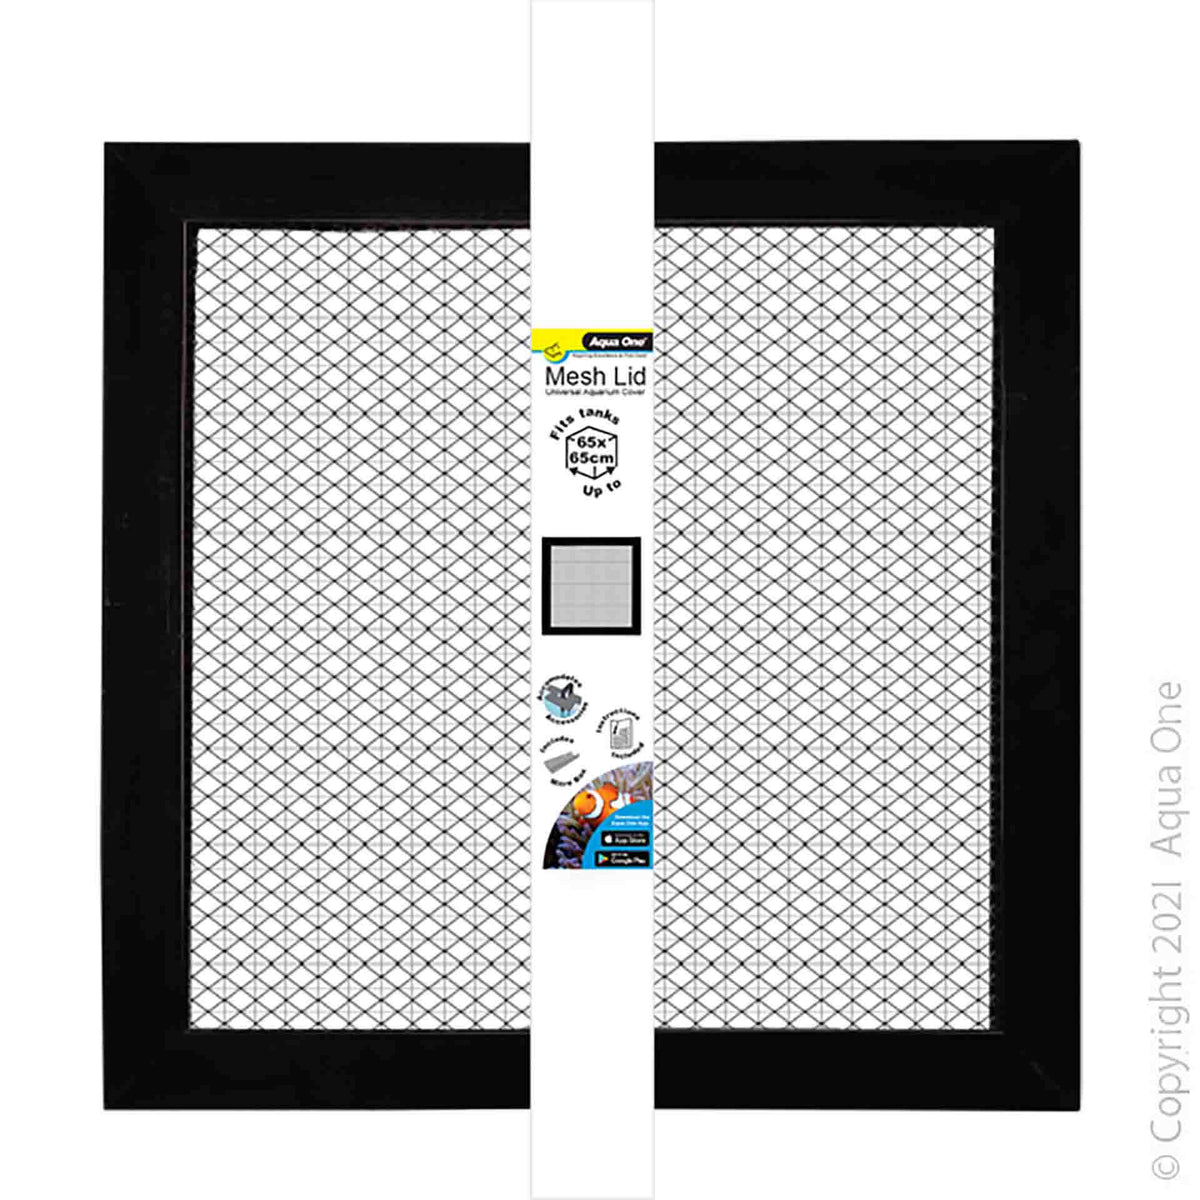 Aqua One Mesh Lid Set To Suit Aquariums Up To 65 X 65cm- In Store Pick Up Only